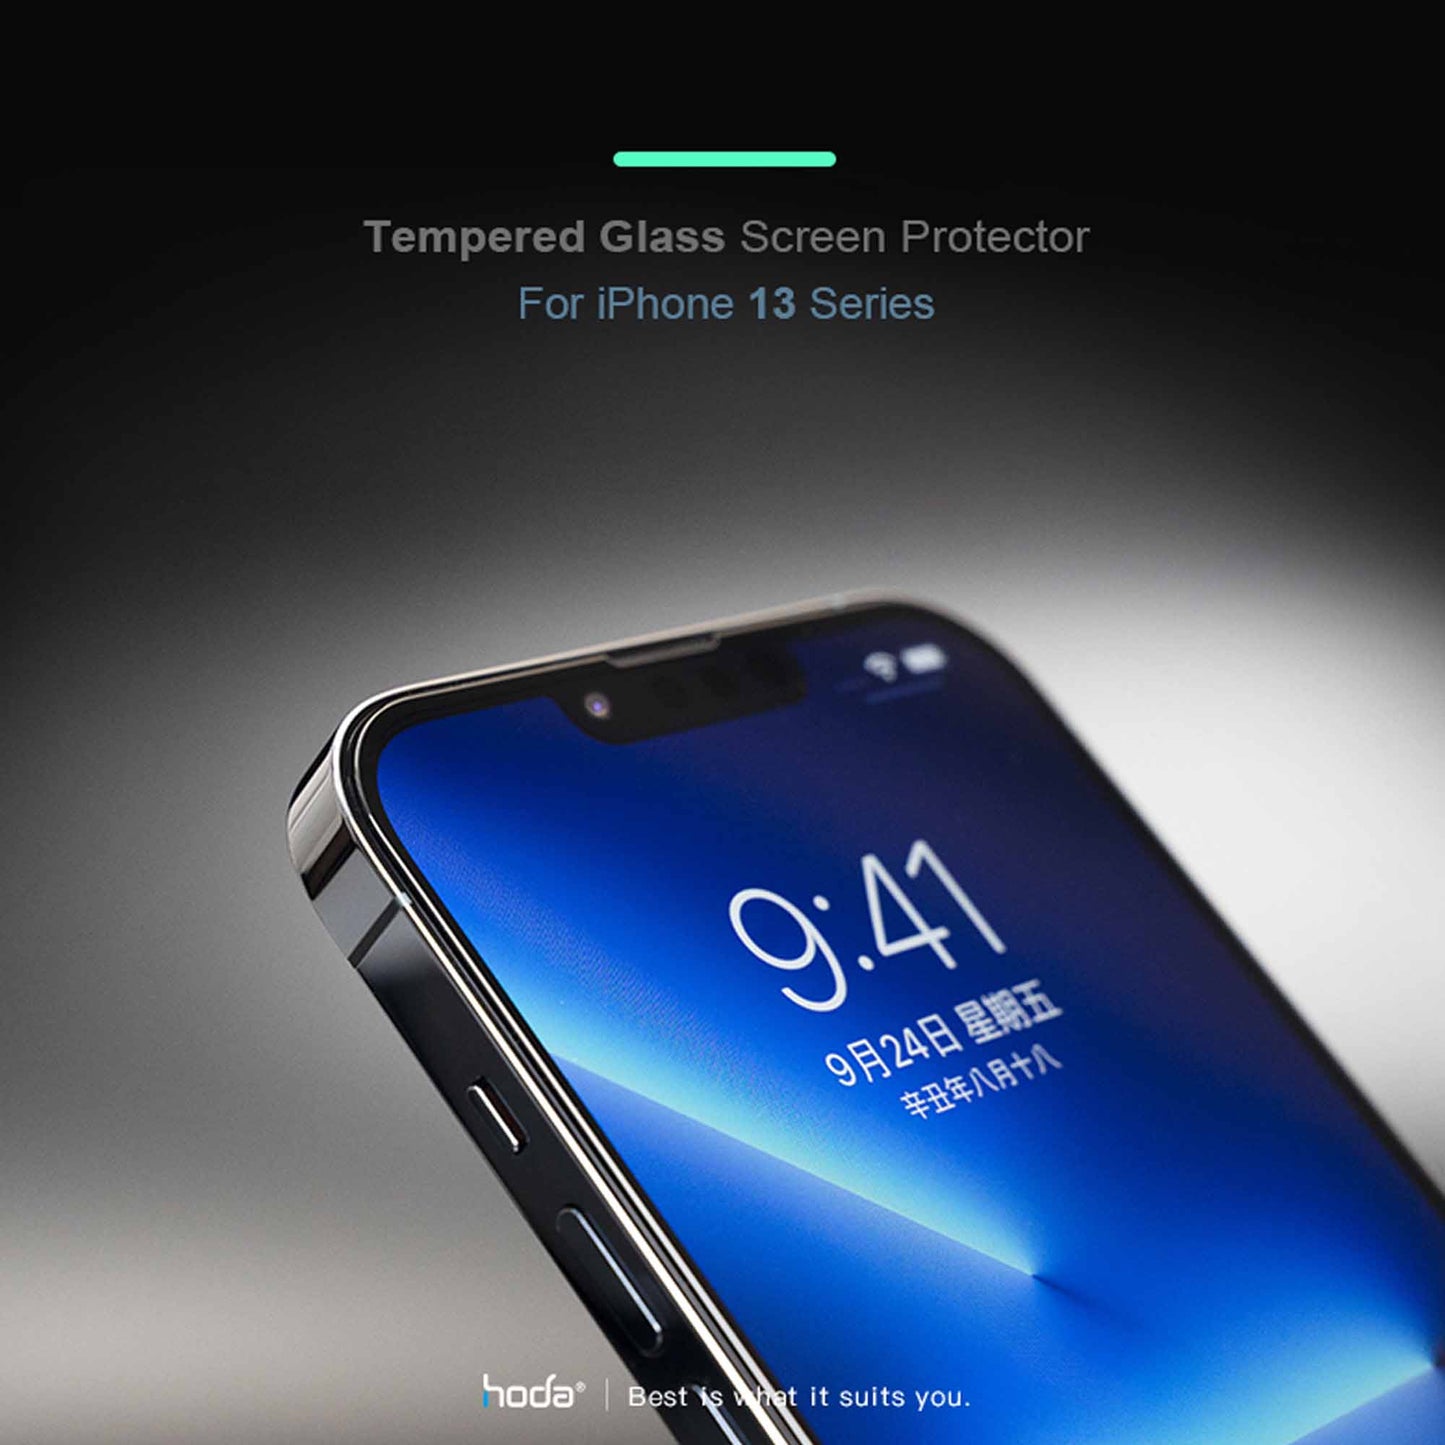 Hoda Anti-Reflection Tempered Glass for iPhone 13 Mini 5.4" 5G - with Helper (Barcode: 4711103542576 )